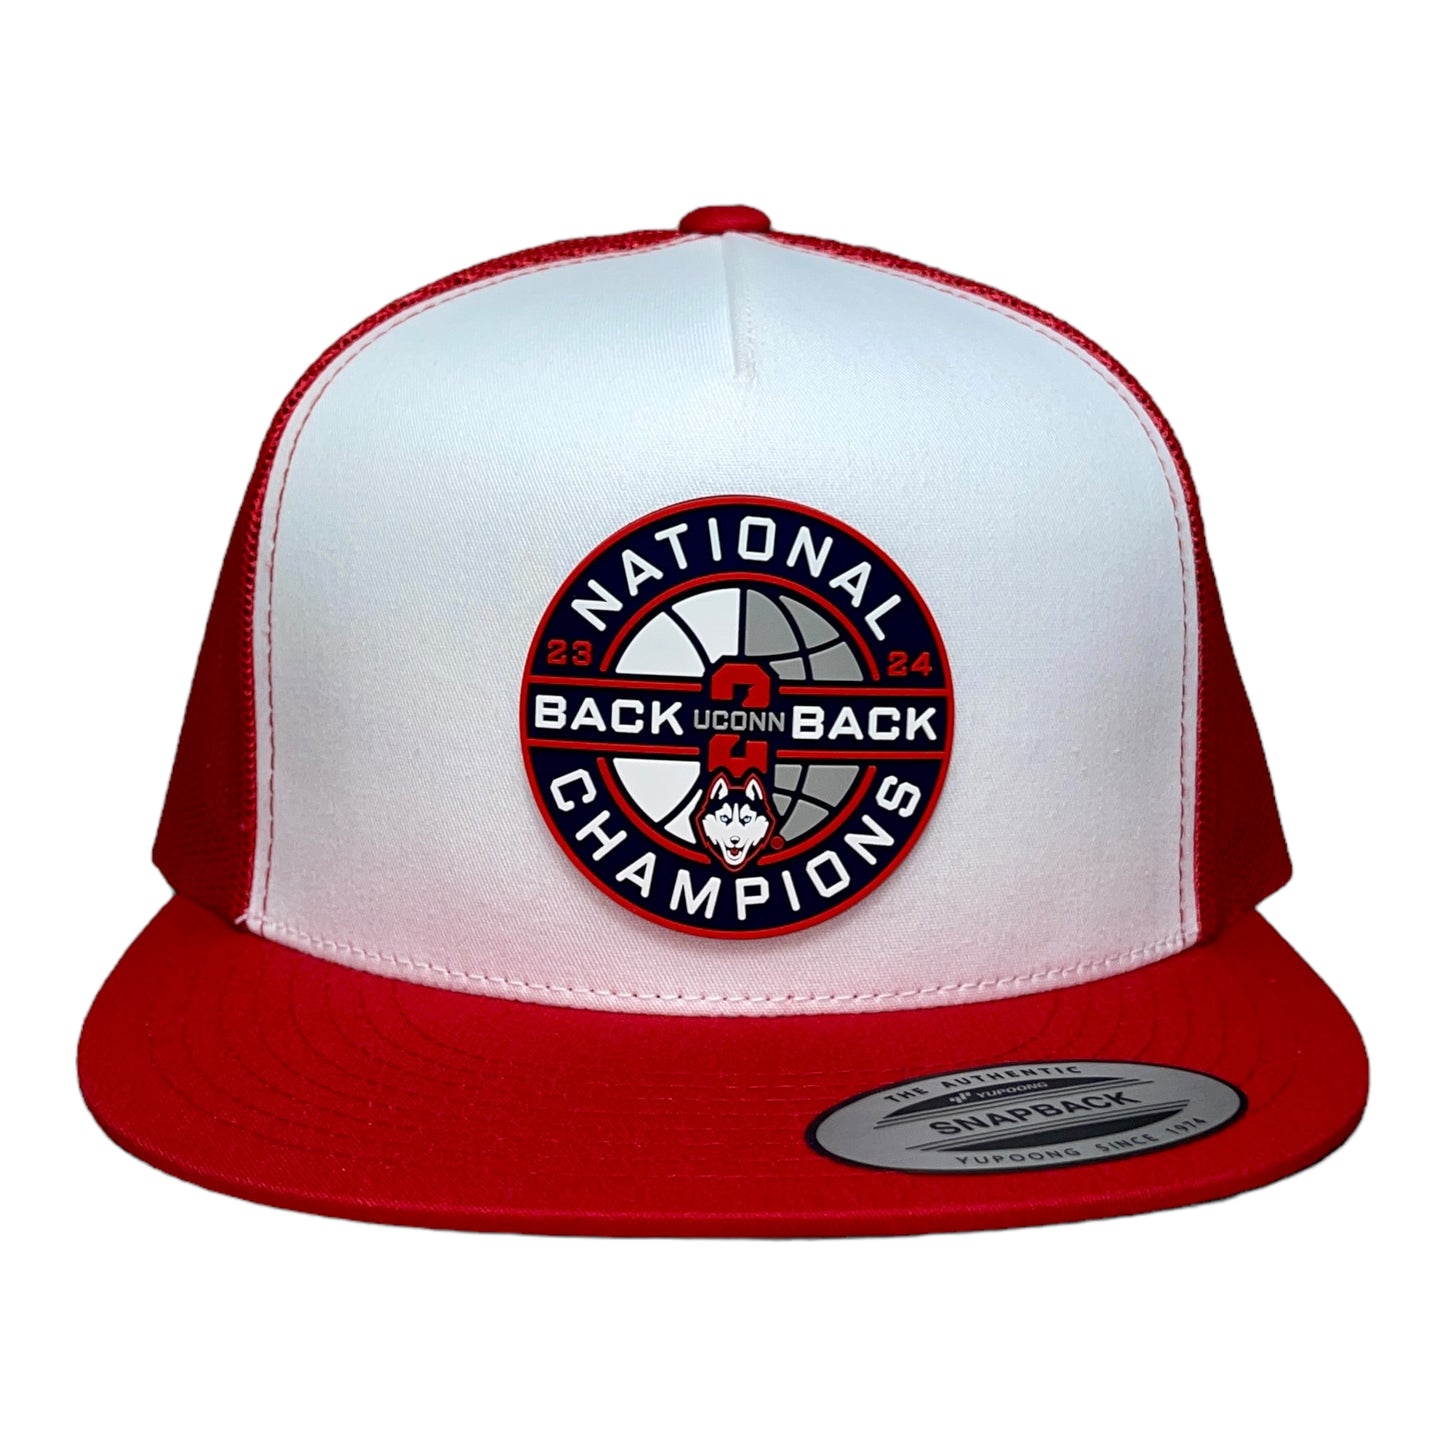 UConn Huskies Back-To-Back NCAA Men's Basketball National Champions 3D YP Snapback Flat Bill Hat- White/ Red